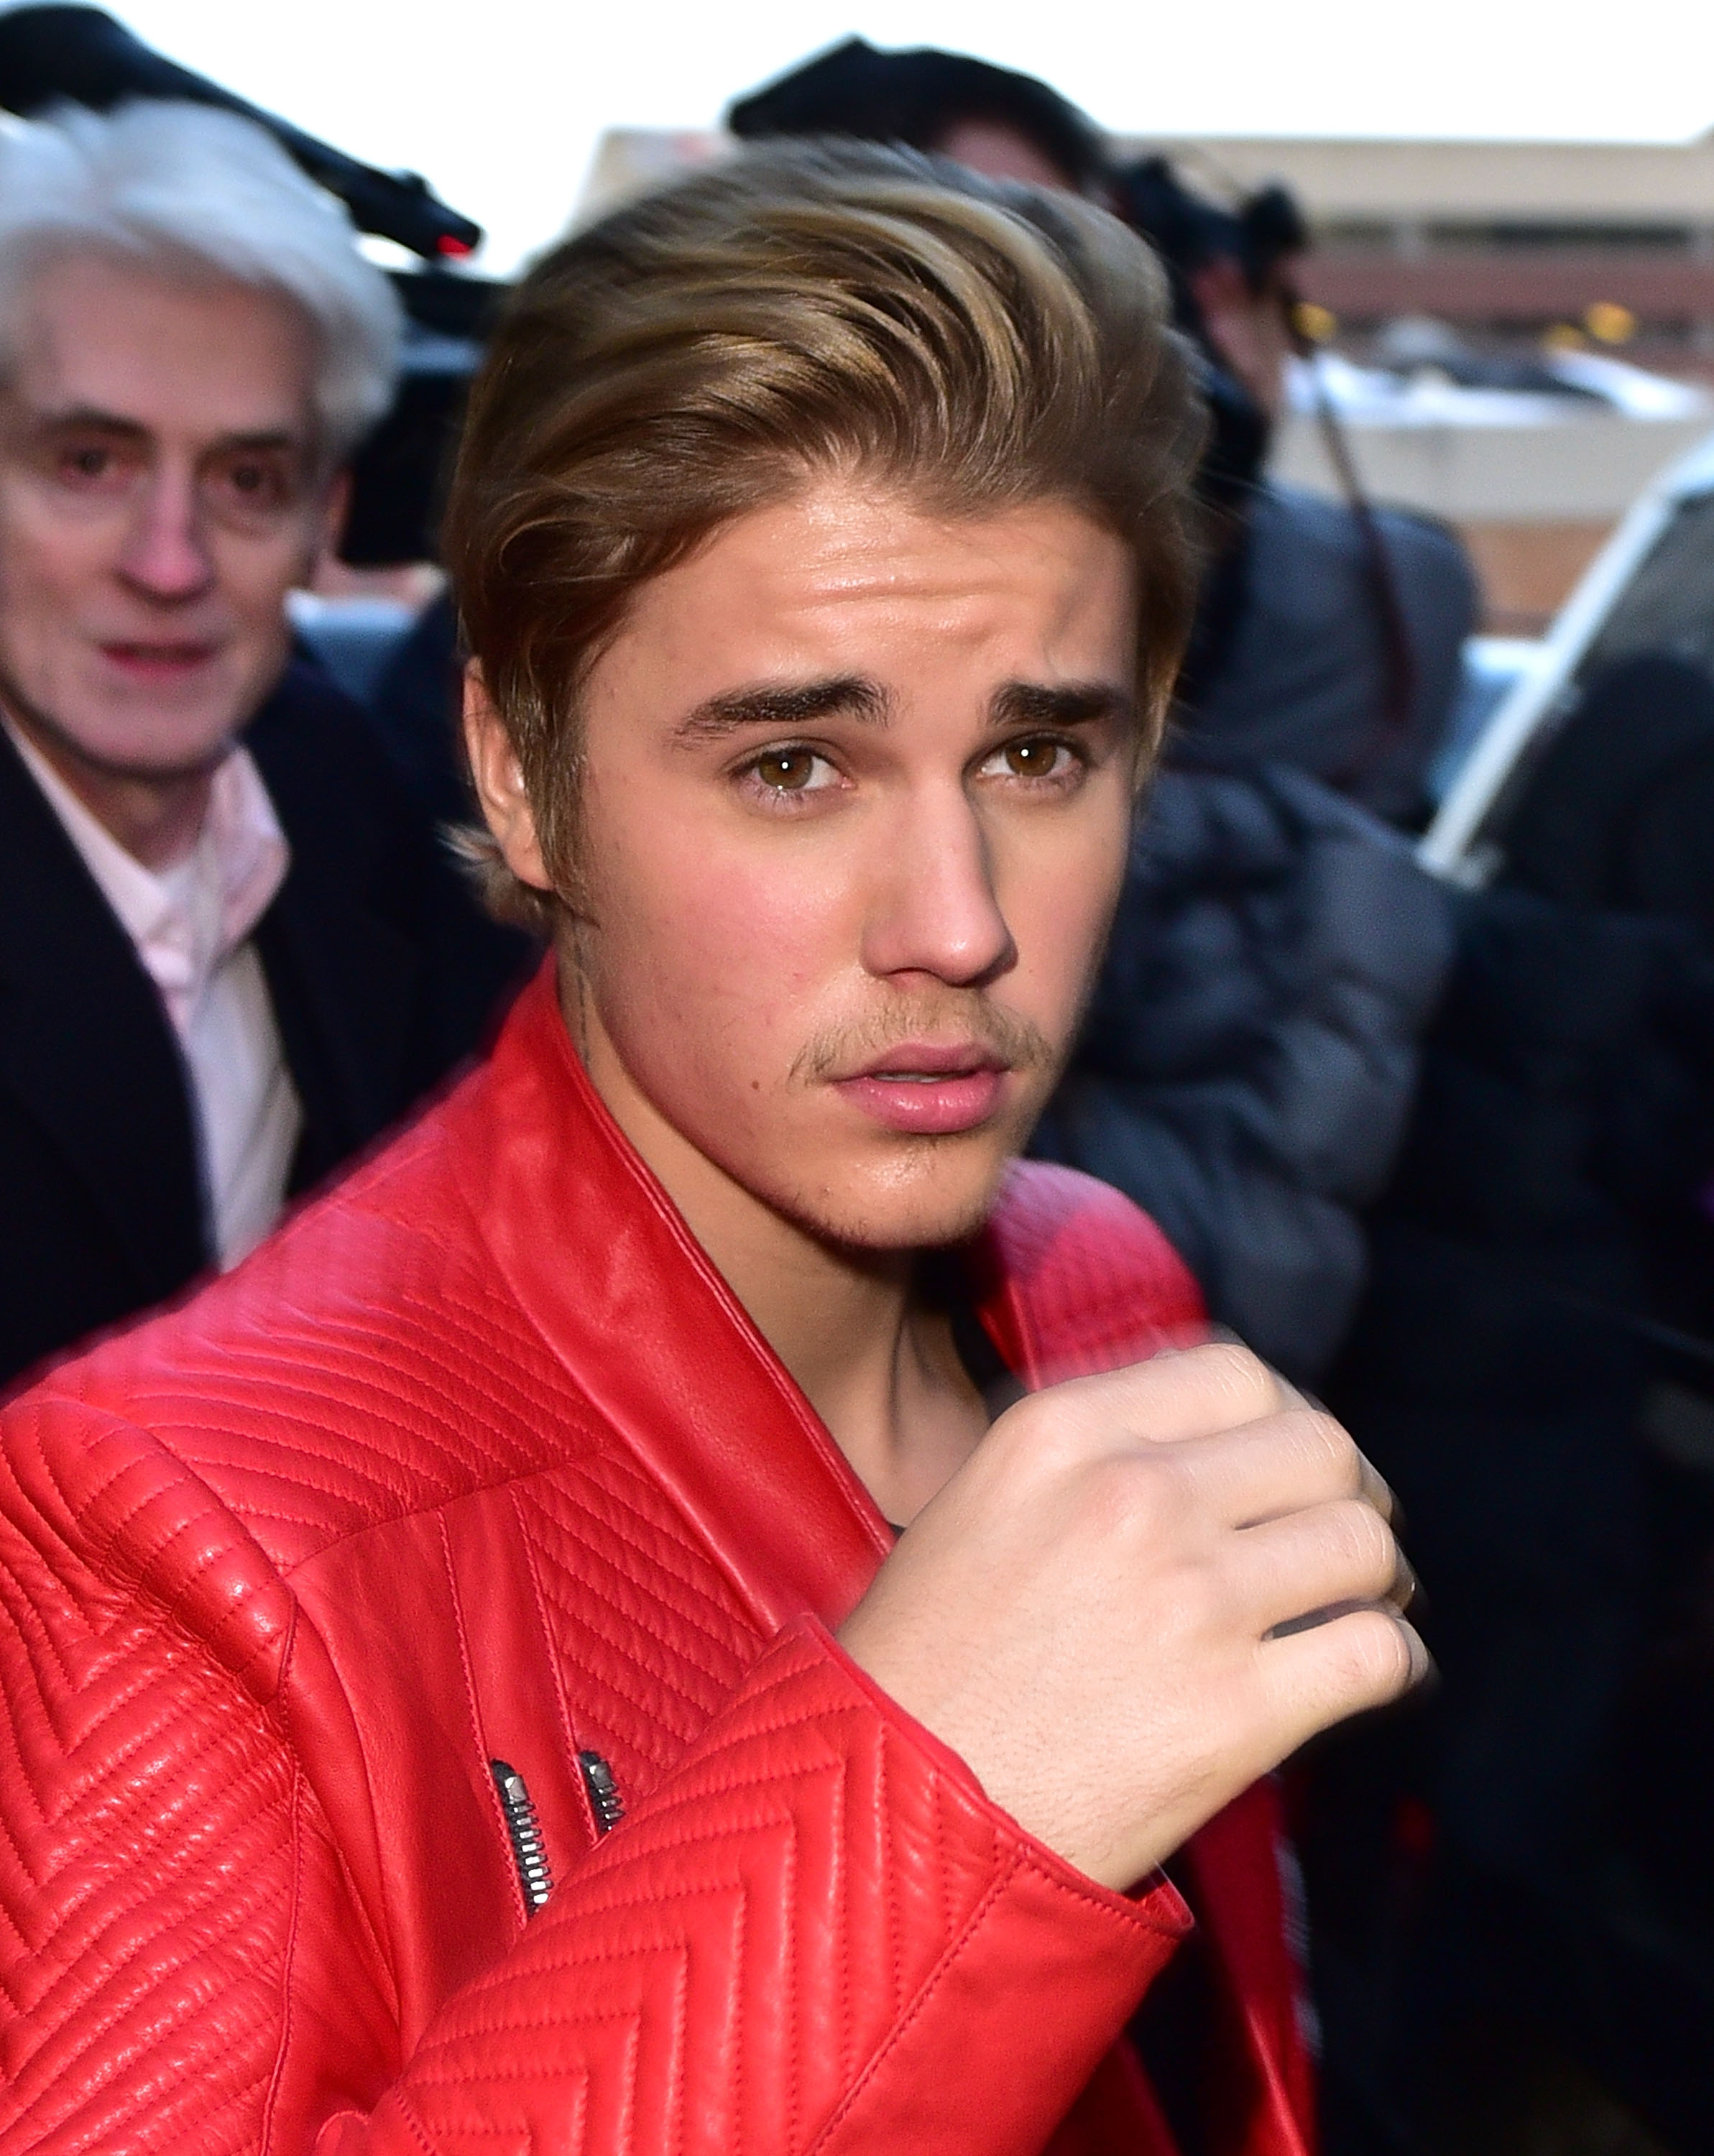 Justin Bieber leaves adidas Originals x Kanye West YEEZY SEASON 1 fashion show during New York Fashion Week Fall 2015 at Skylight Clarkson Sq on Feb. 12, 2015 in New York City. (James Devaney—GC Images/Getty Images)